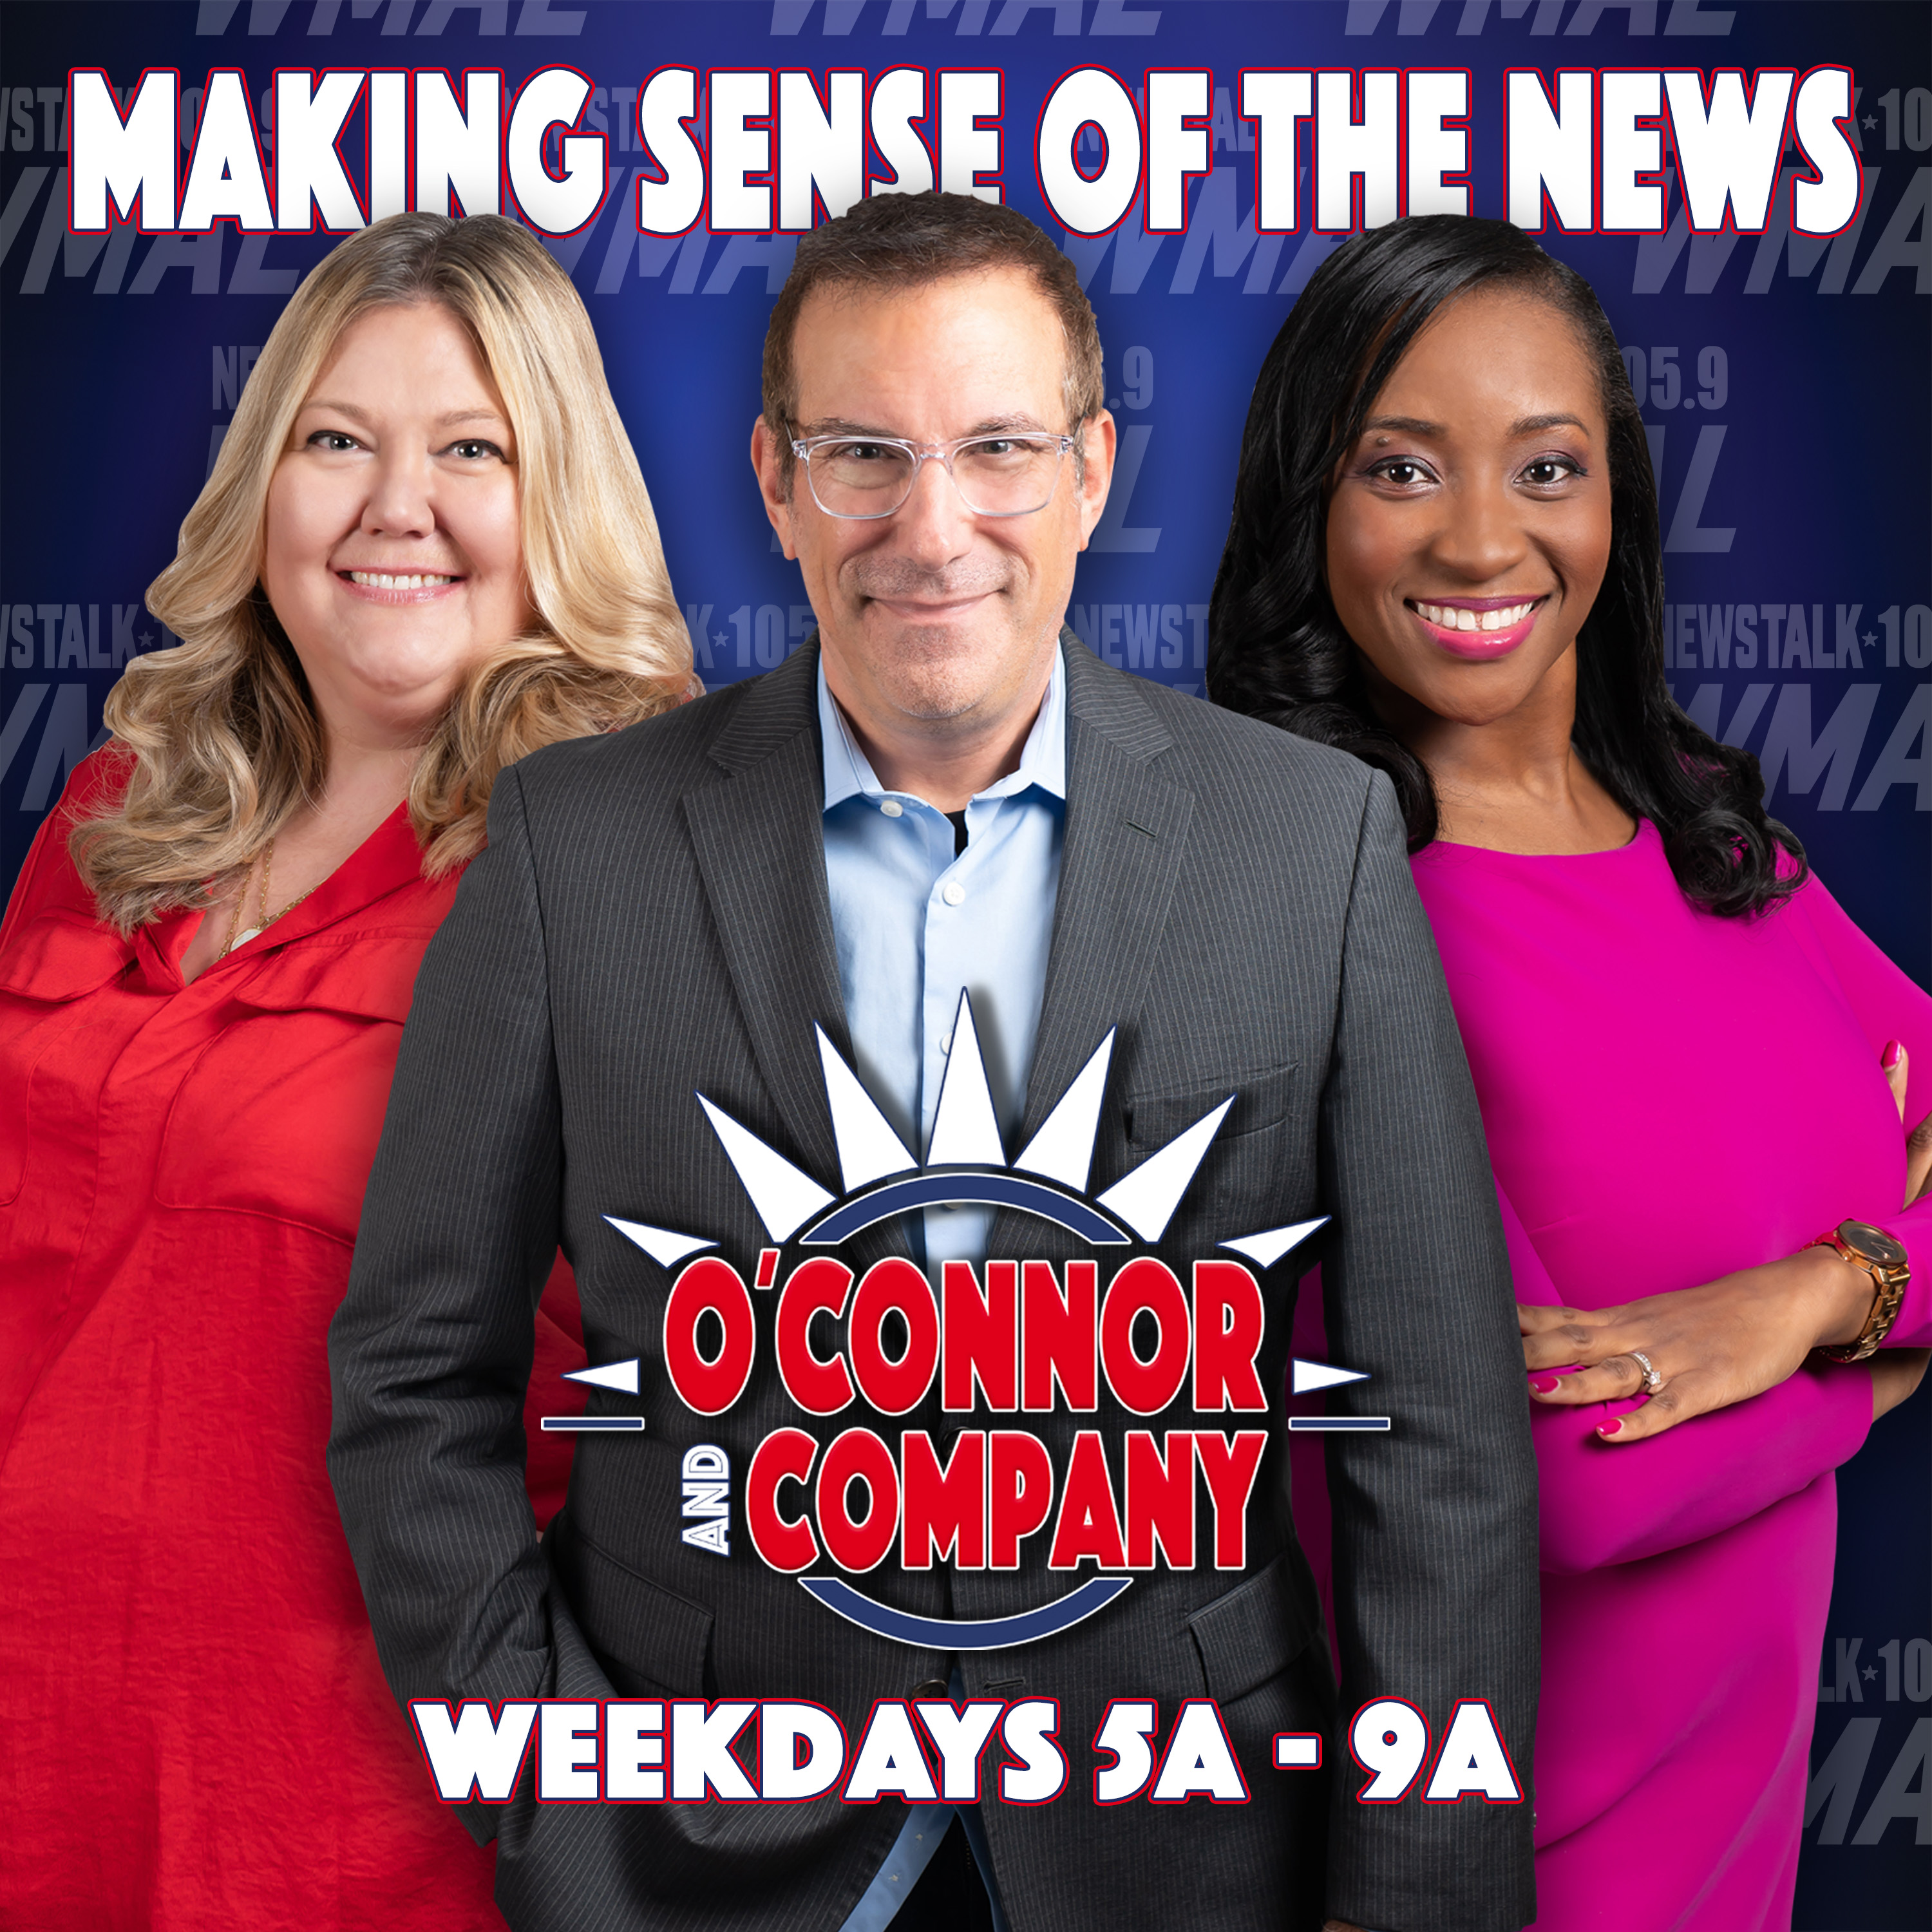 O'Connor & Company Interview - LYN MONTGOMERY - President of TWU Local 556, the Union of Southwest Airlines Flight Attendants - 05.27.21